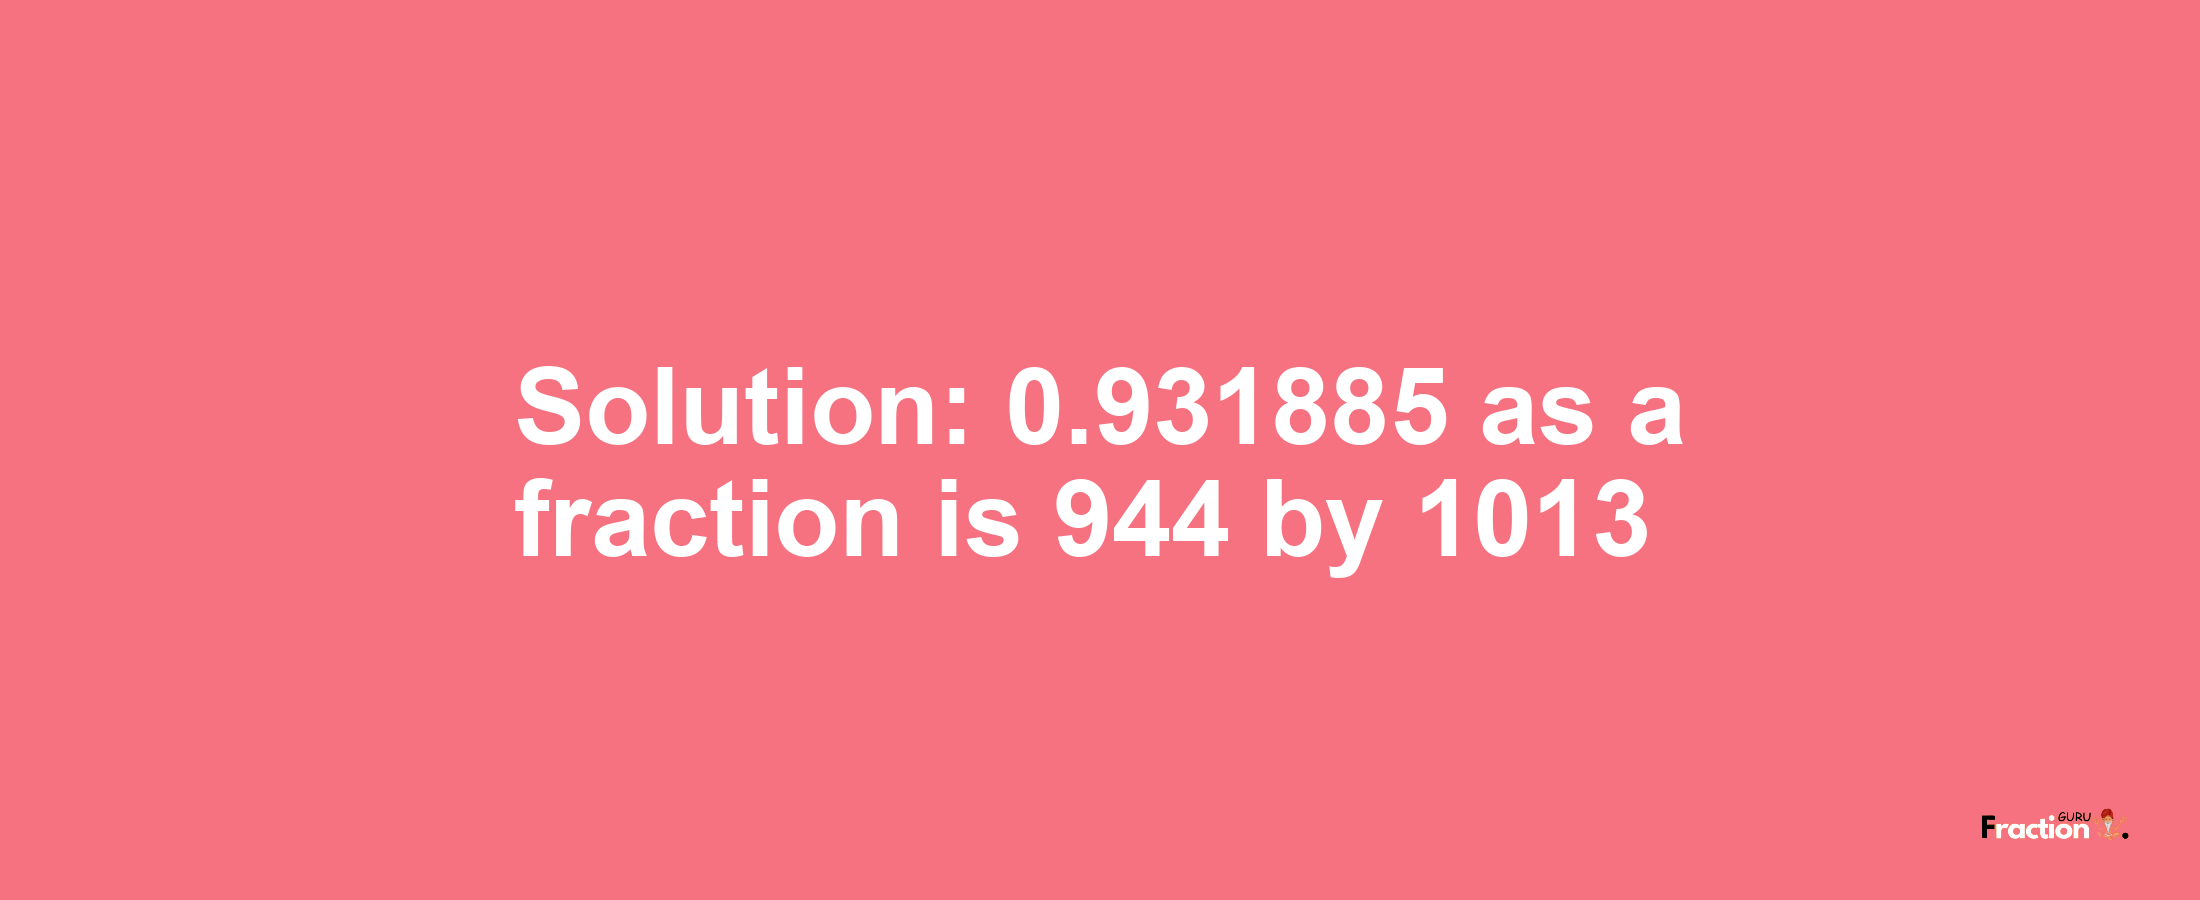 Solution:0.931885 as a fraction is 944/1013